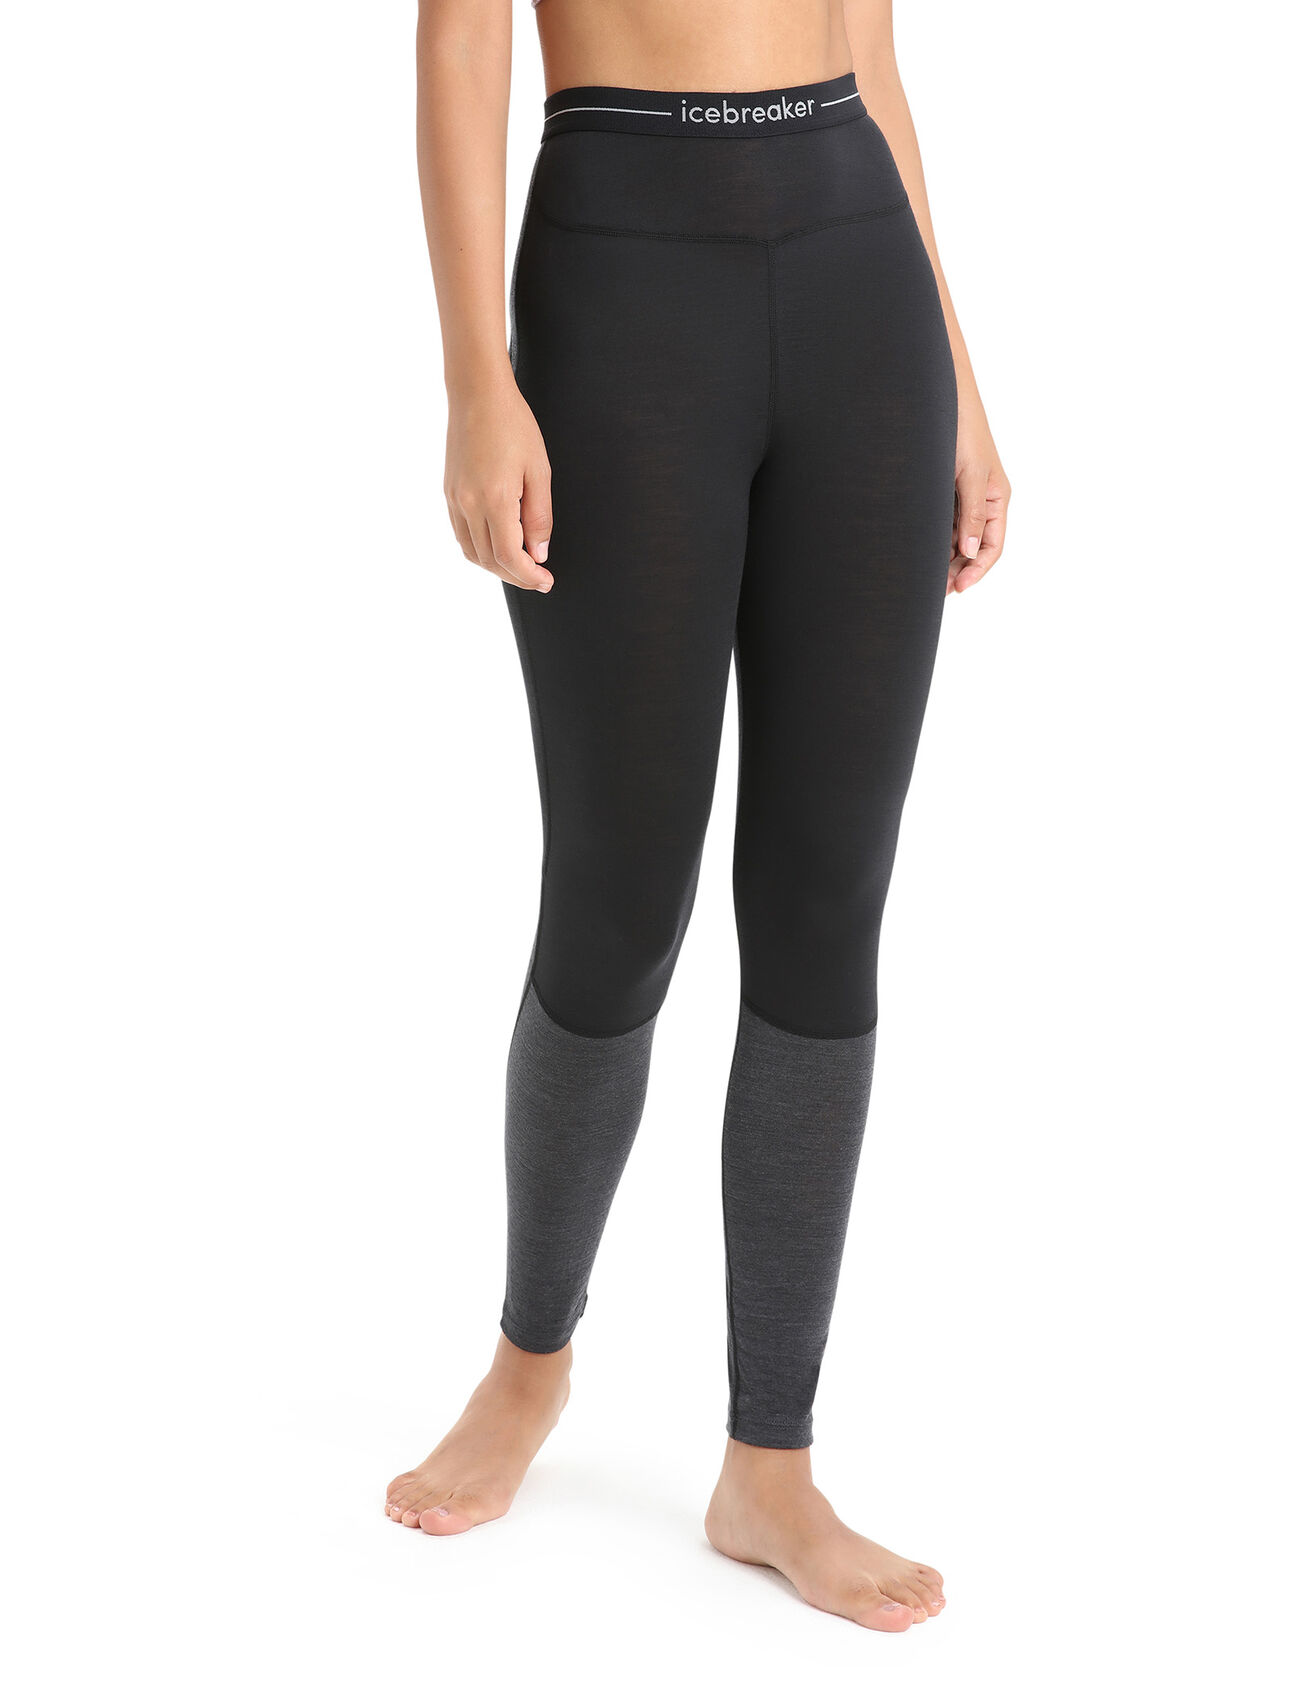 Womens 125 ZoneKnit™ Merino Thermal Leggings Ultralight merino base layer bottoms designed to help regulate body temperature during high-intensity activity, the 125 ZoneKnit™ Leggings feature our jersey Cool-Lite™ fabric for adventure and everyday training.